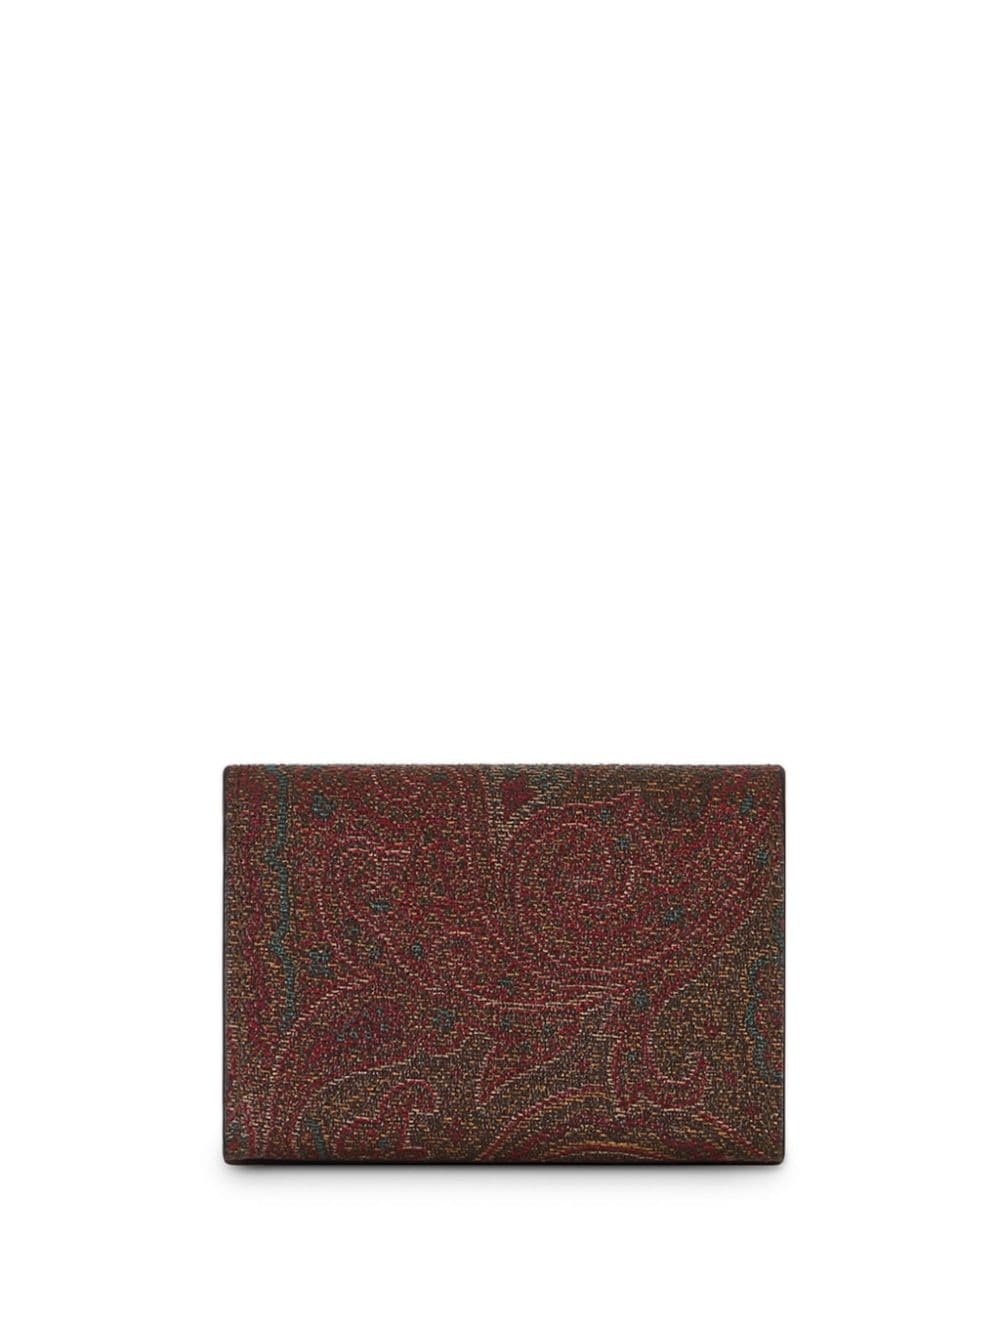 paisley-jacquard leather wallet - 2